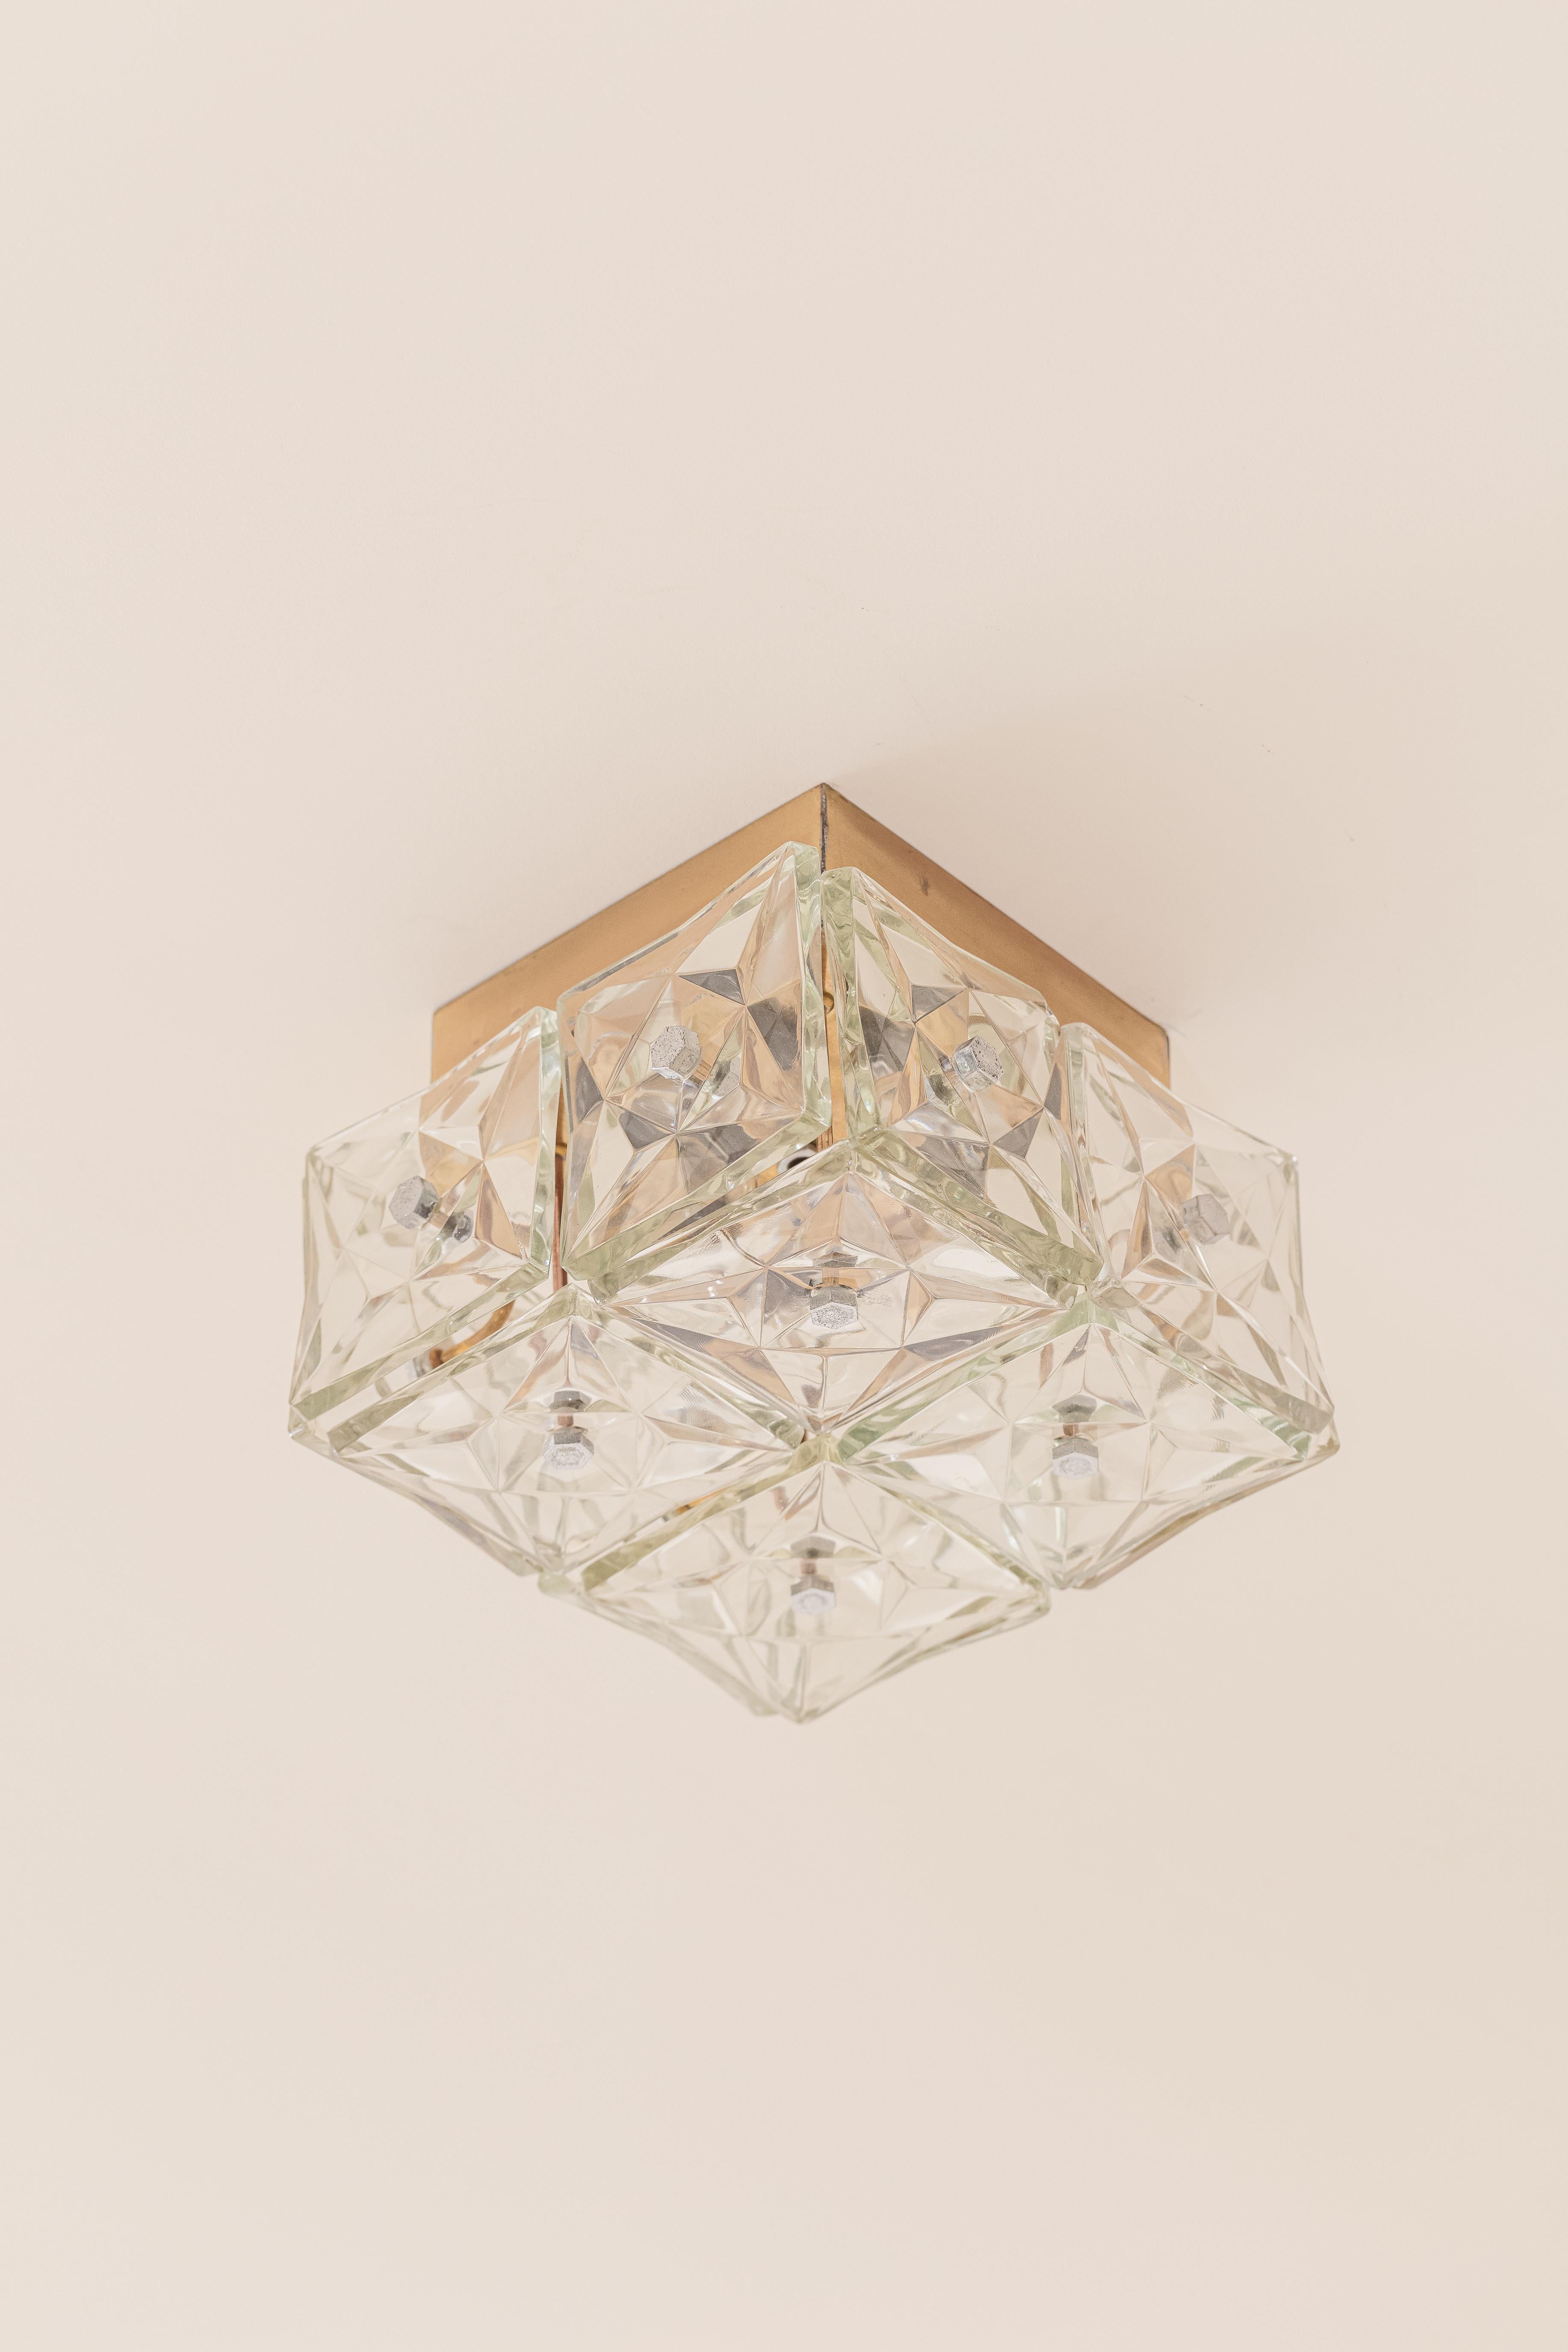 Brass and Prismatic Glass Ceiling Lamp, Brazilian Company Lustres Pelotas, 1950s For Sale 5